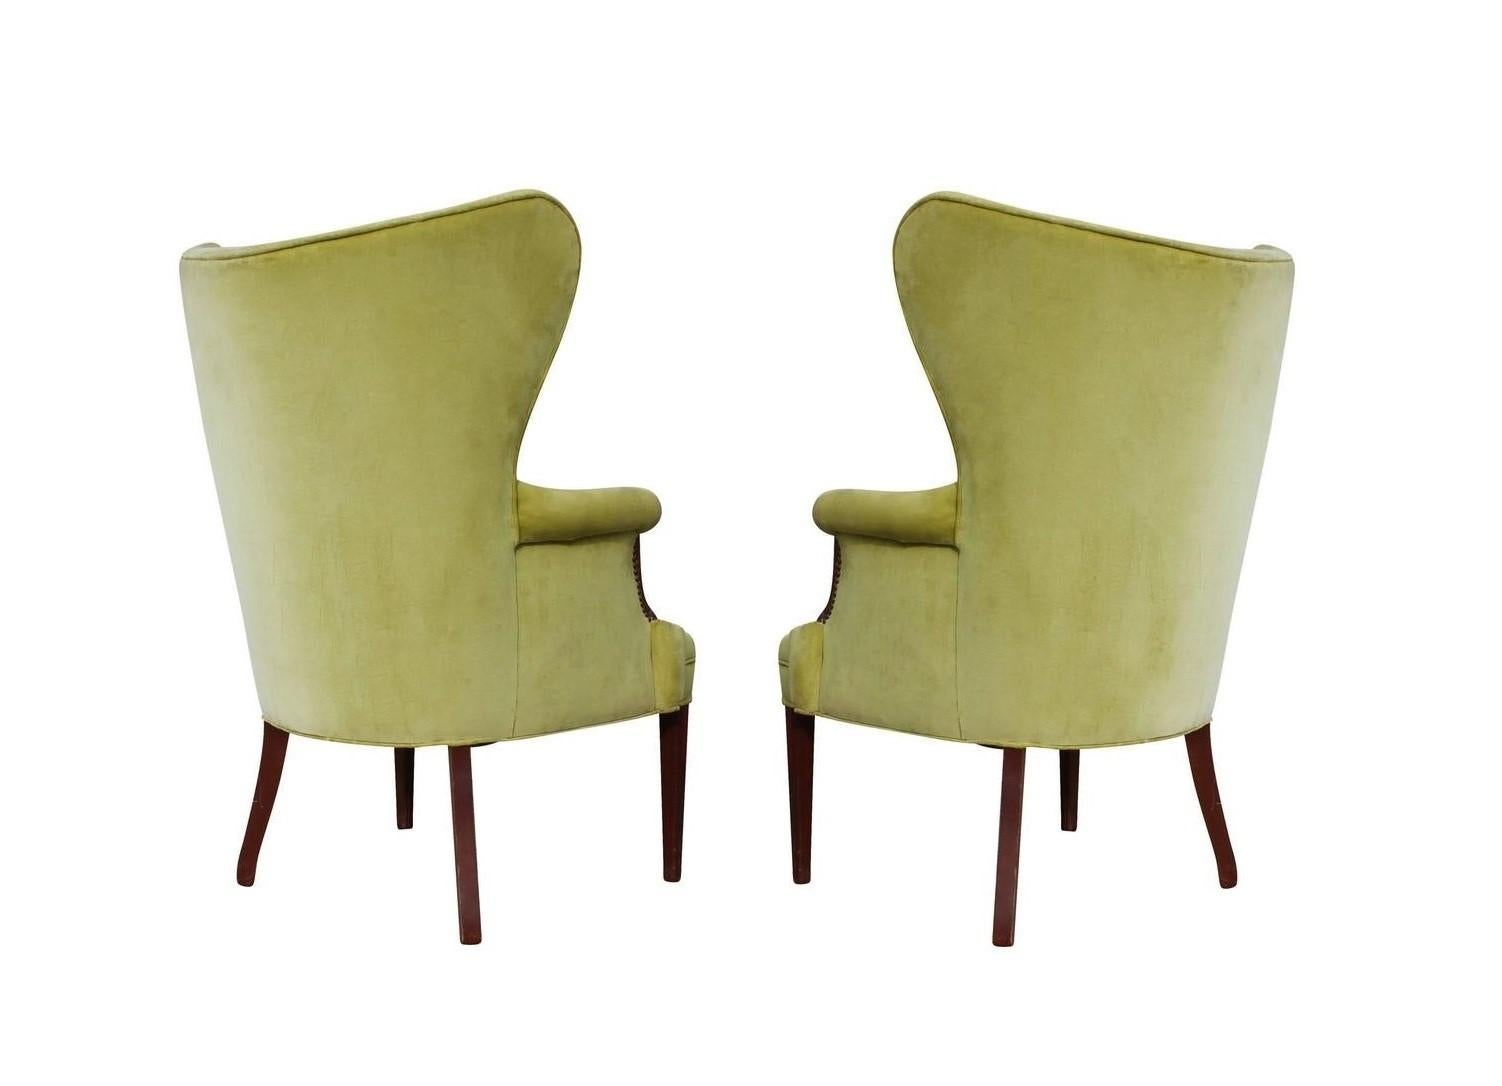 1940's Mid-Century Modern Butterfly Wingback Chairs In Excellent Condition For Sale In Dallas, TX